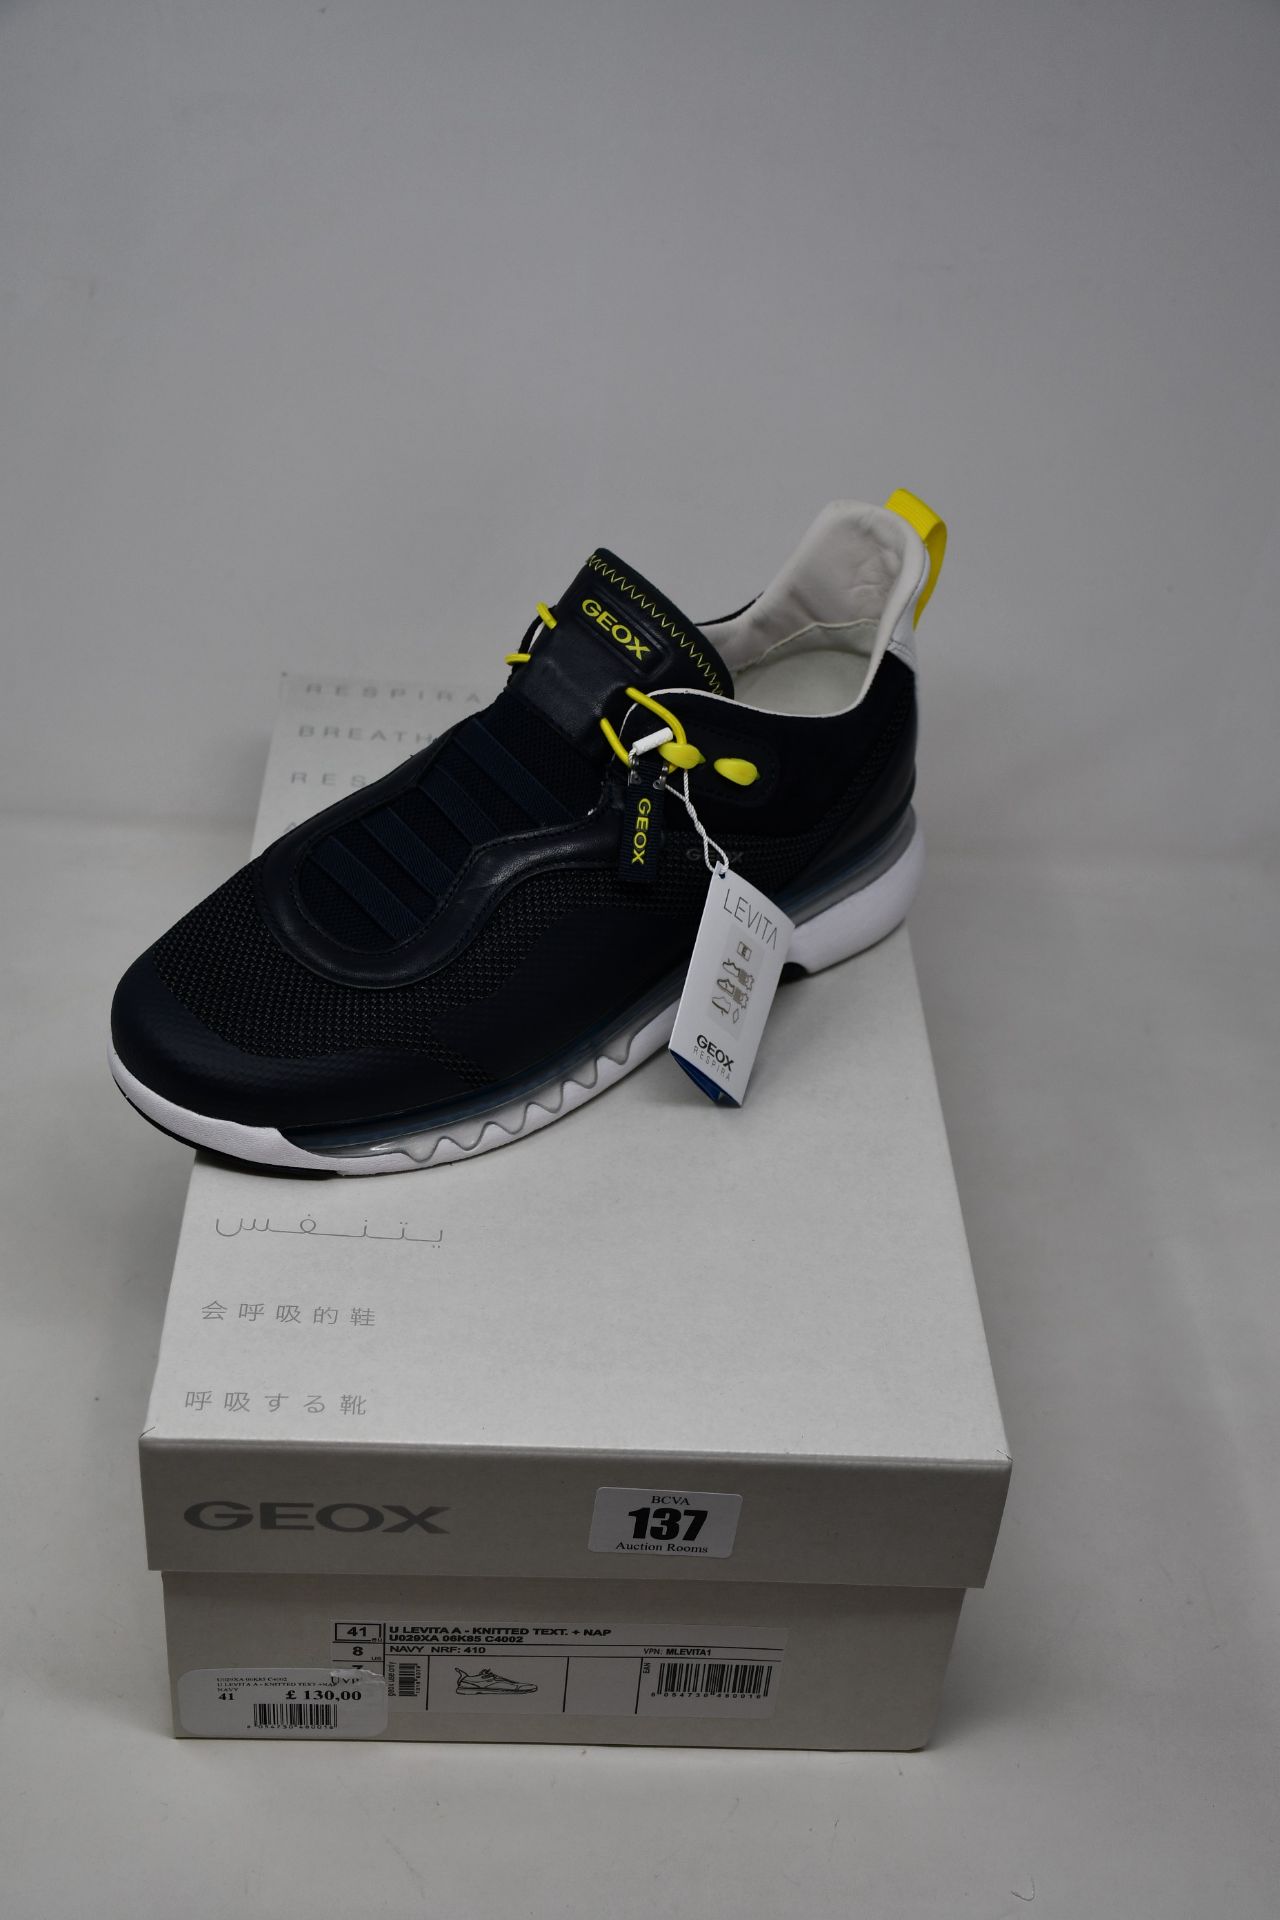 A pair of as new Geox Levita trainers (UK 7 - RRP £130).